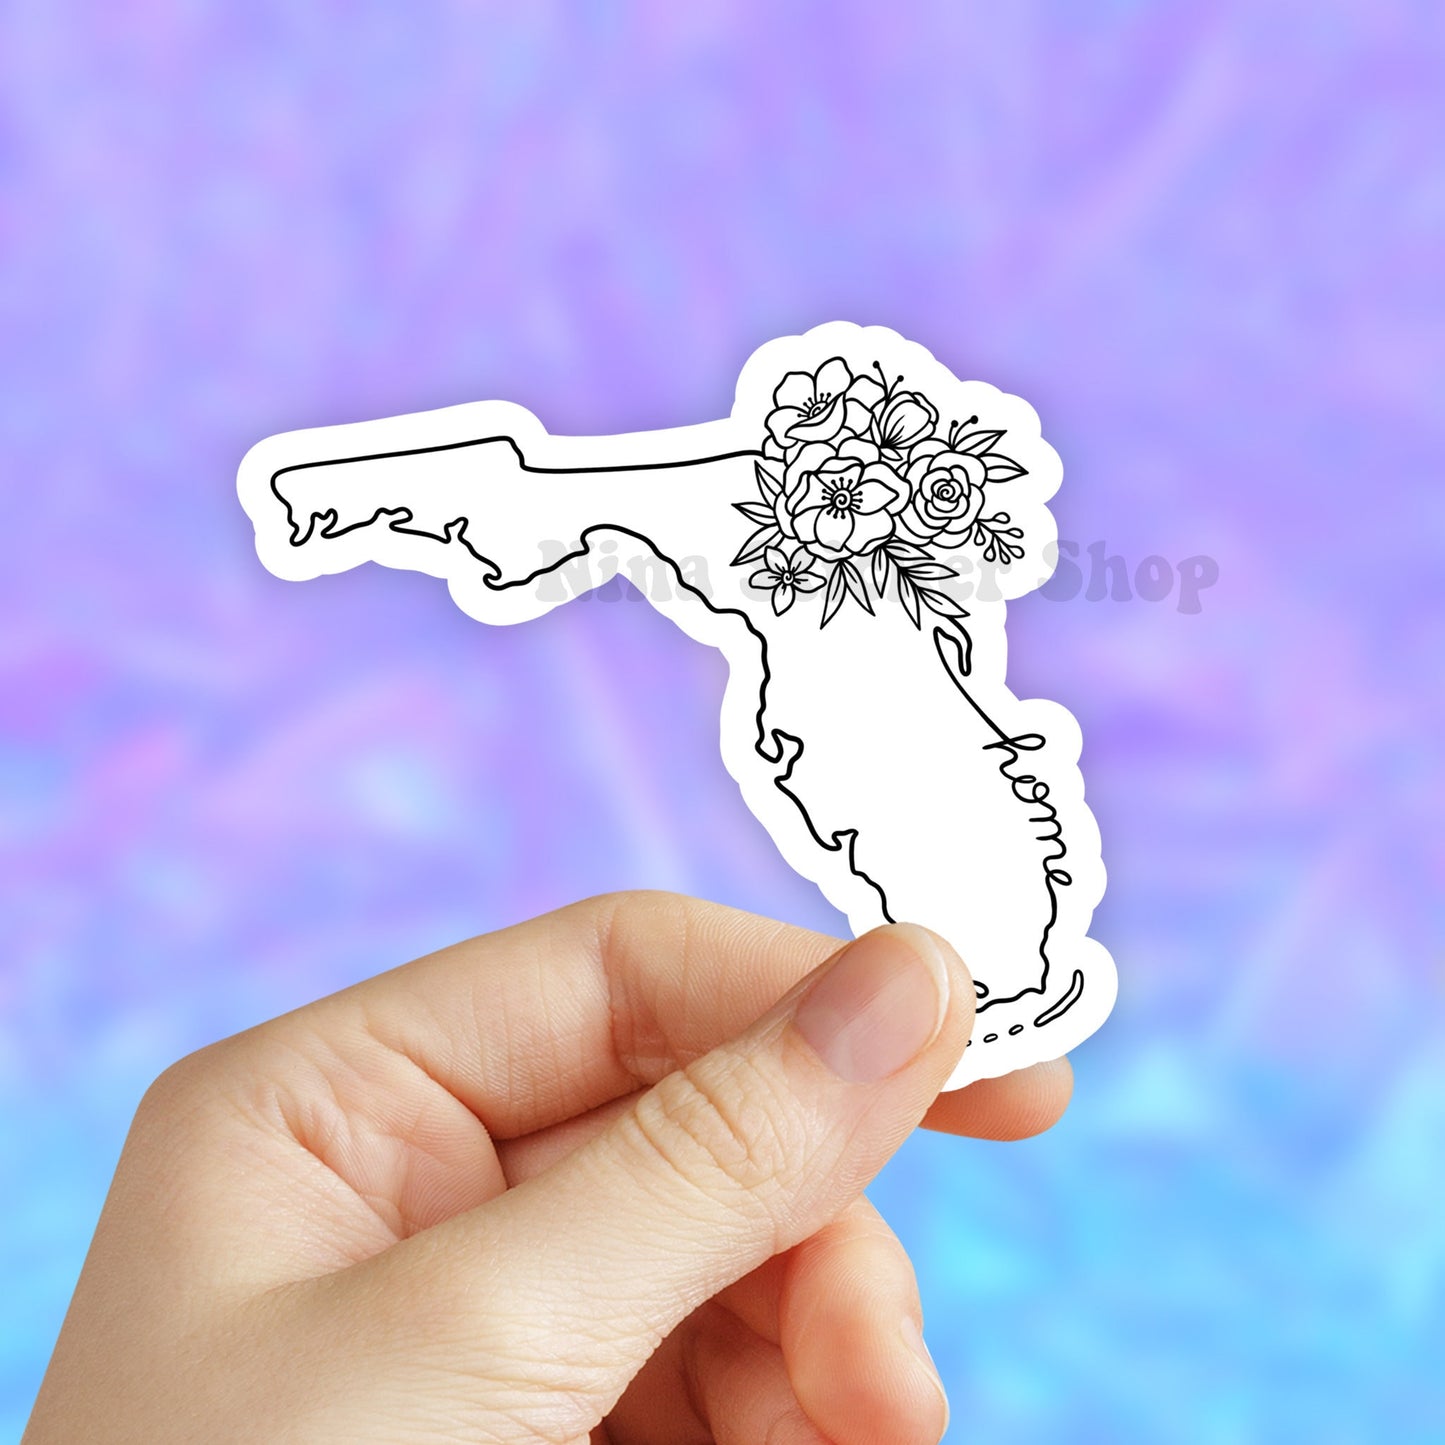 Florida State Sticker, Floral States Map, USA Map Laptop Sticker, Aesthetic stickers, Laptop decal, Water bottle, Computer Bumper Sticker